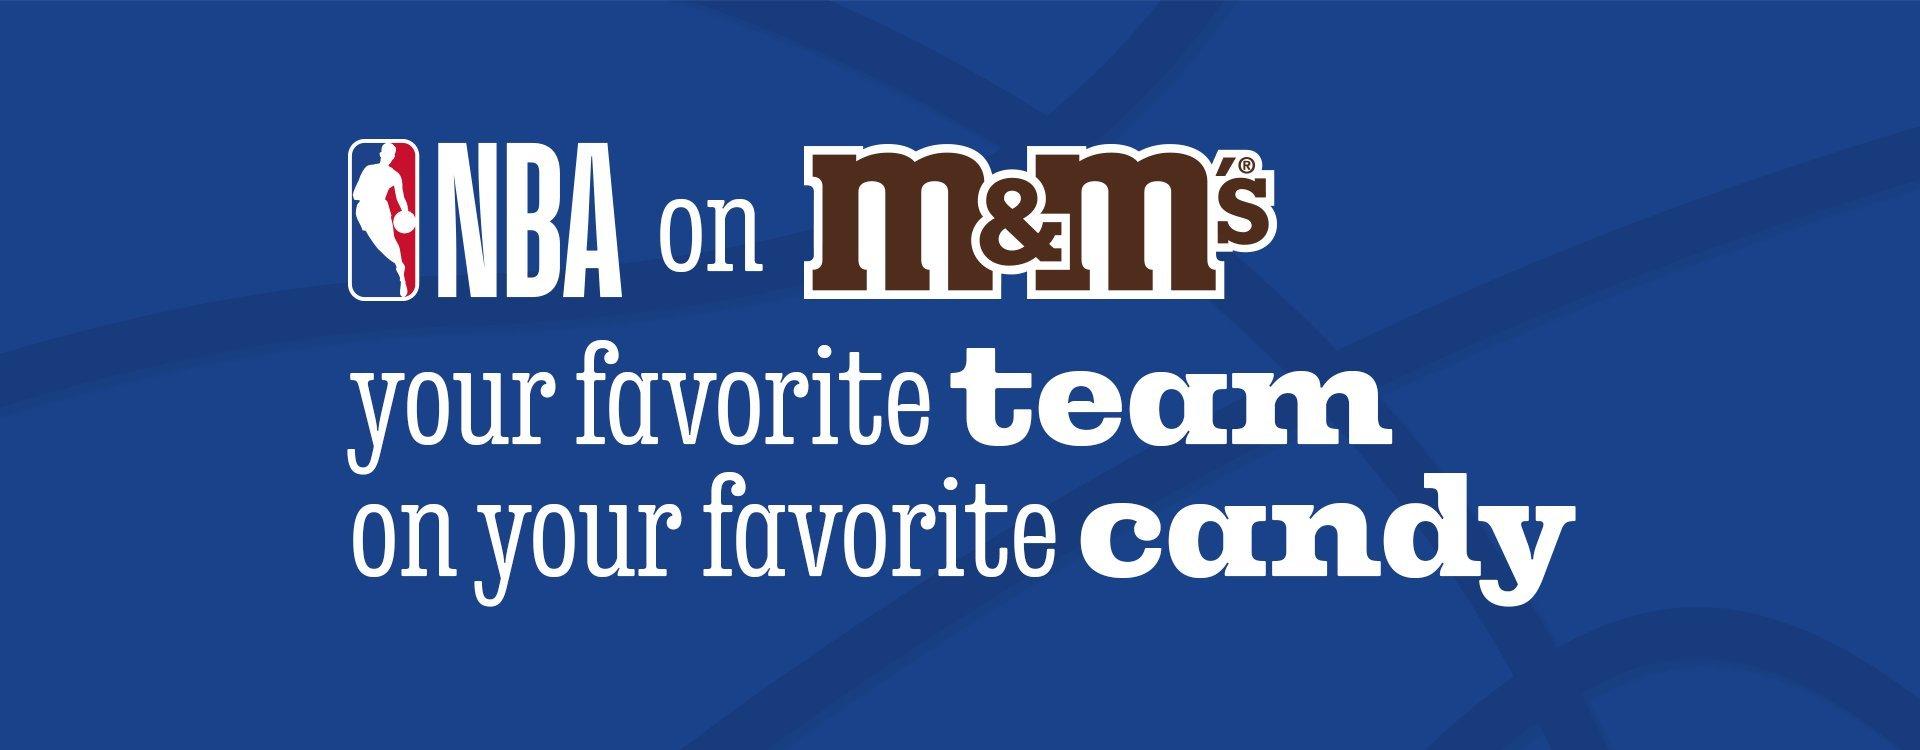 M&M'S on X: A message from M&M'S.  / X